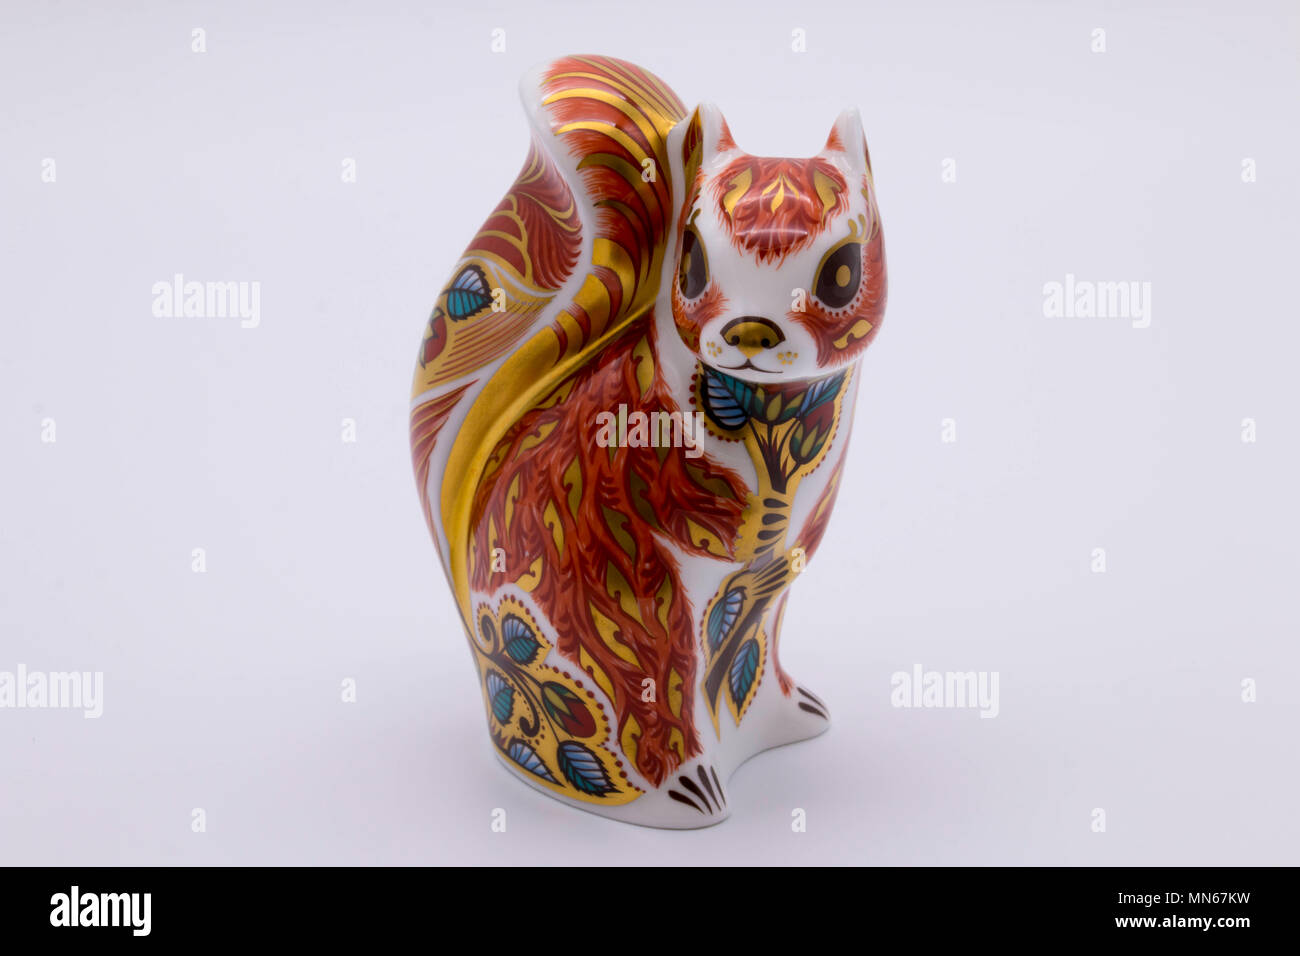 Royal Crown Derby bone china paperweight of a squirrel uk Stock Photo